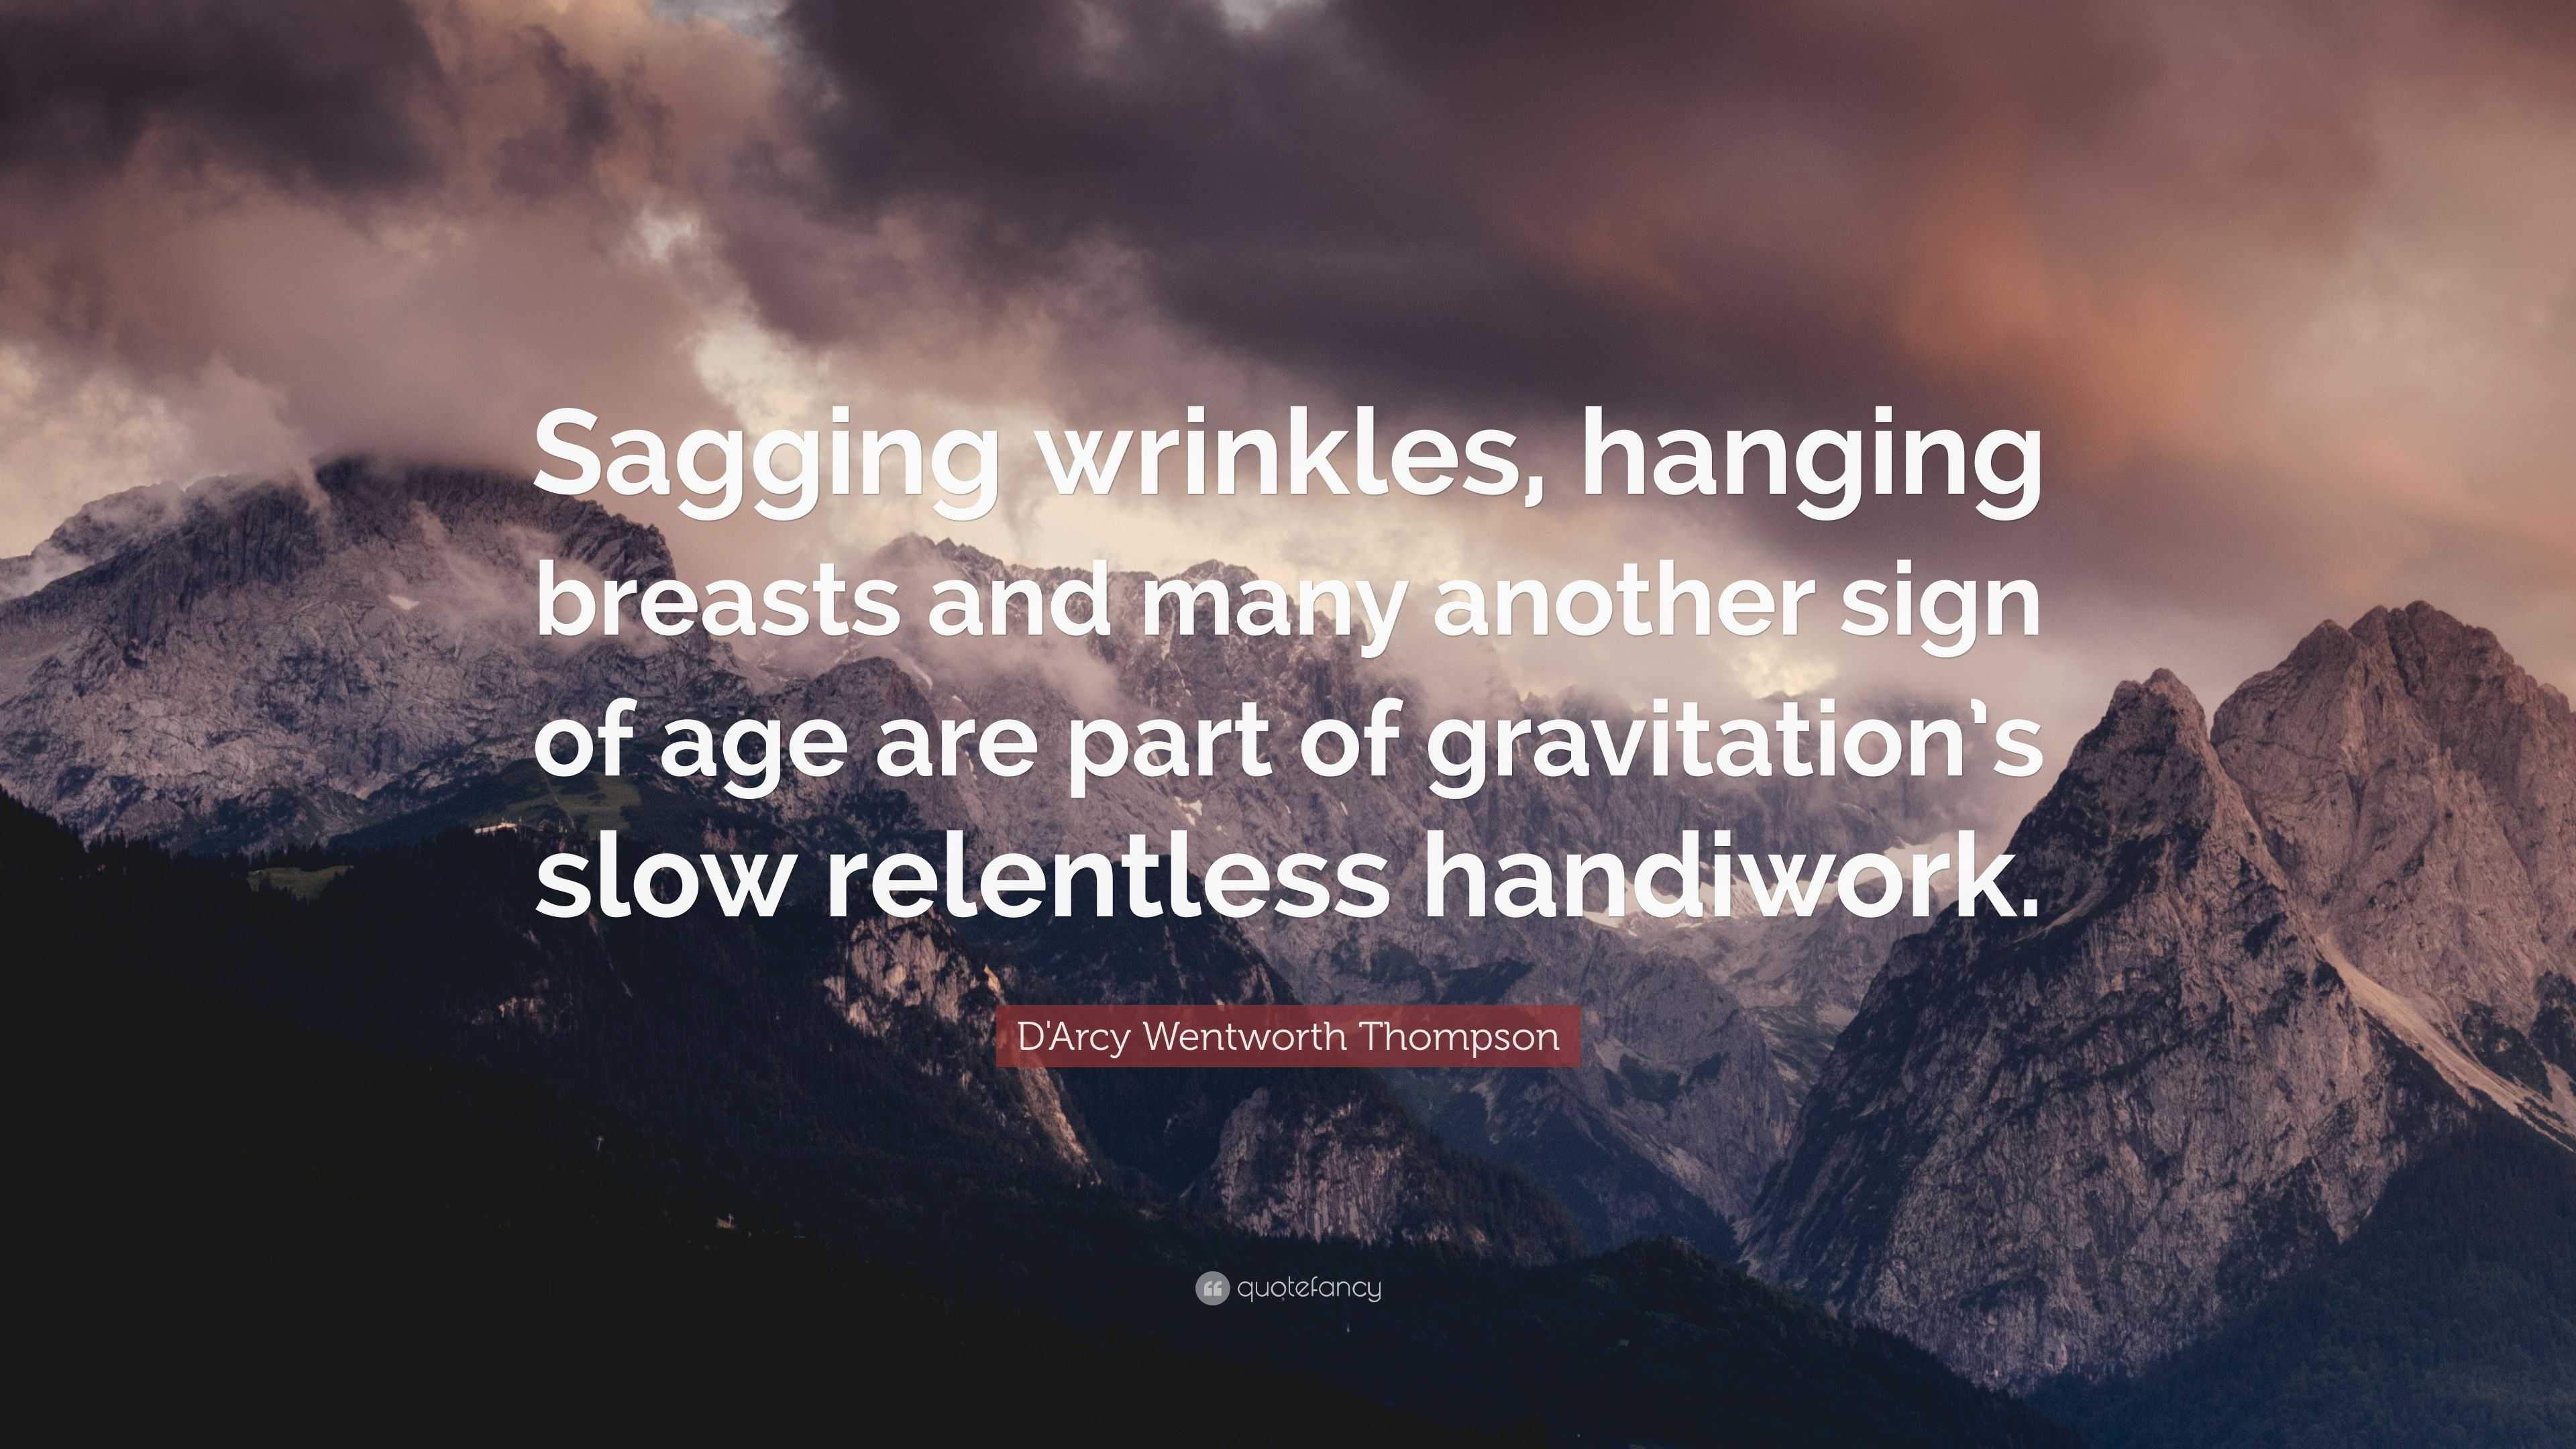 D'Arcy Wentworth Thompson Quote: “Sagging wrinkles, hanging breasts and  many another sign of age are